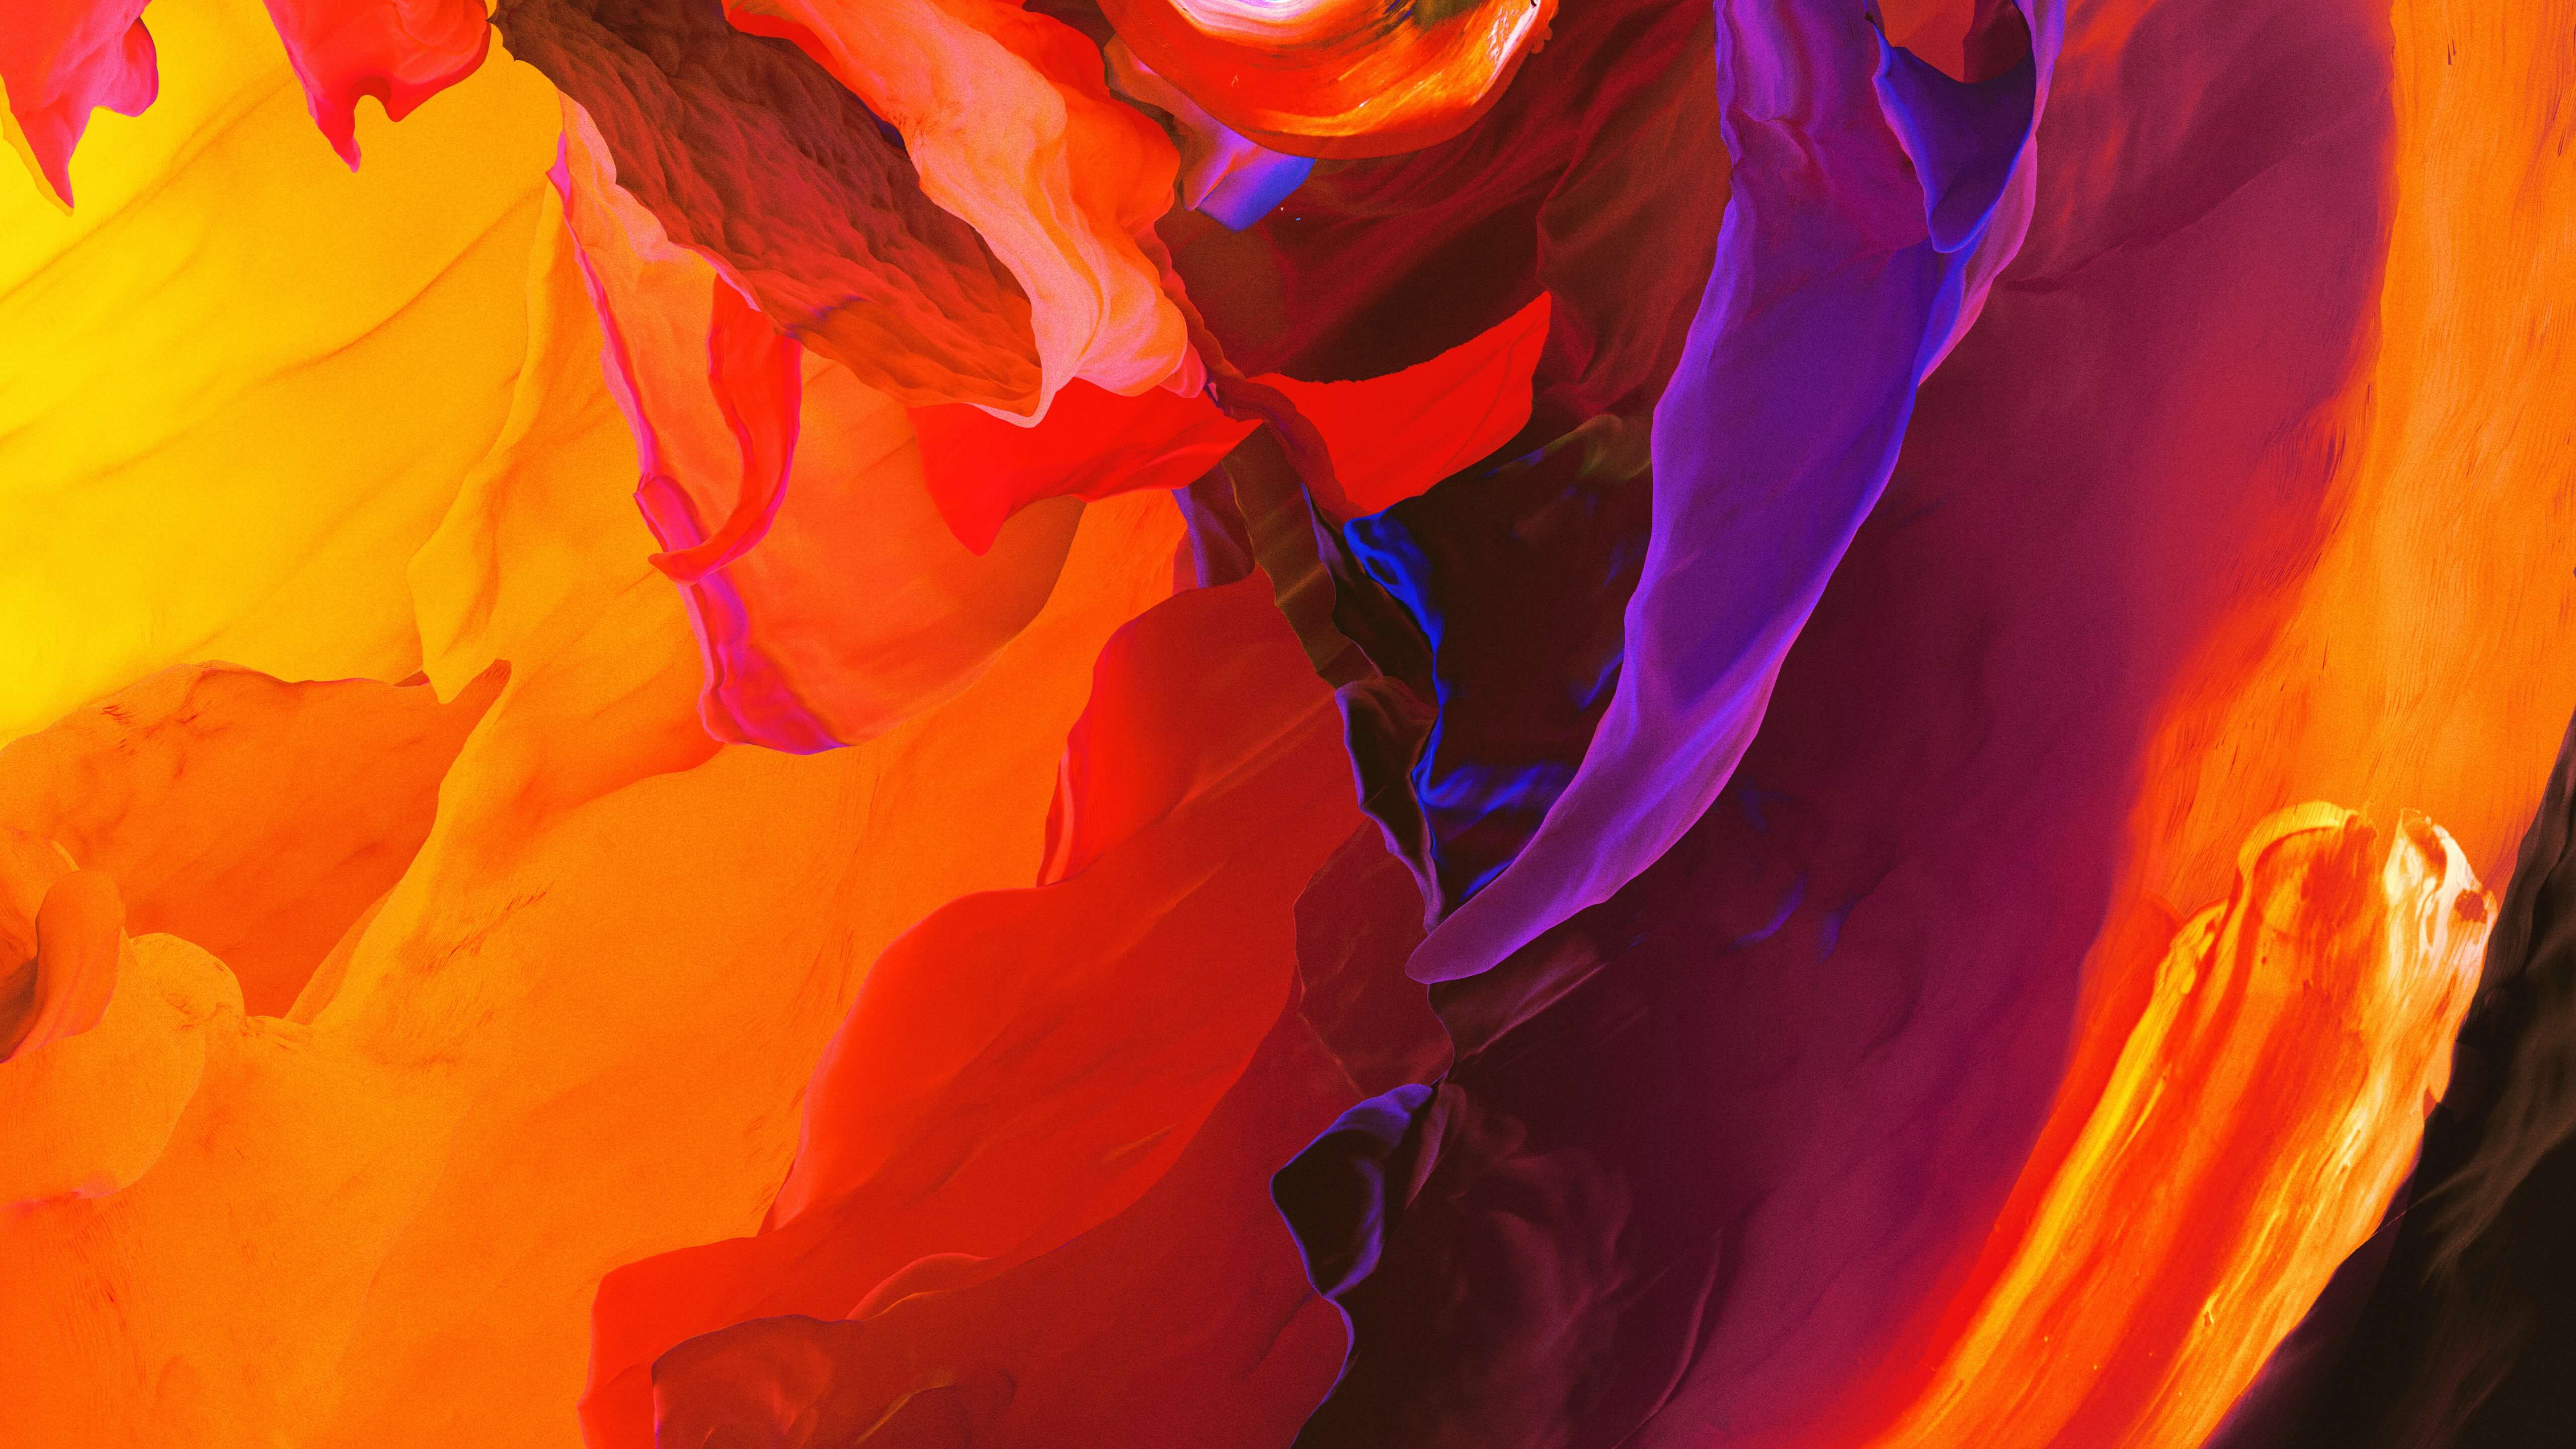 Red Orange Colorful Abstract wallpaper 5120x2880